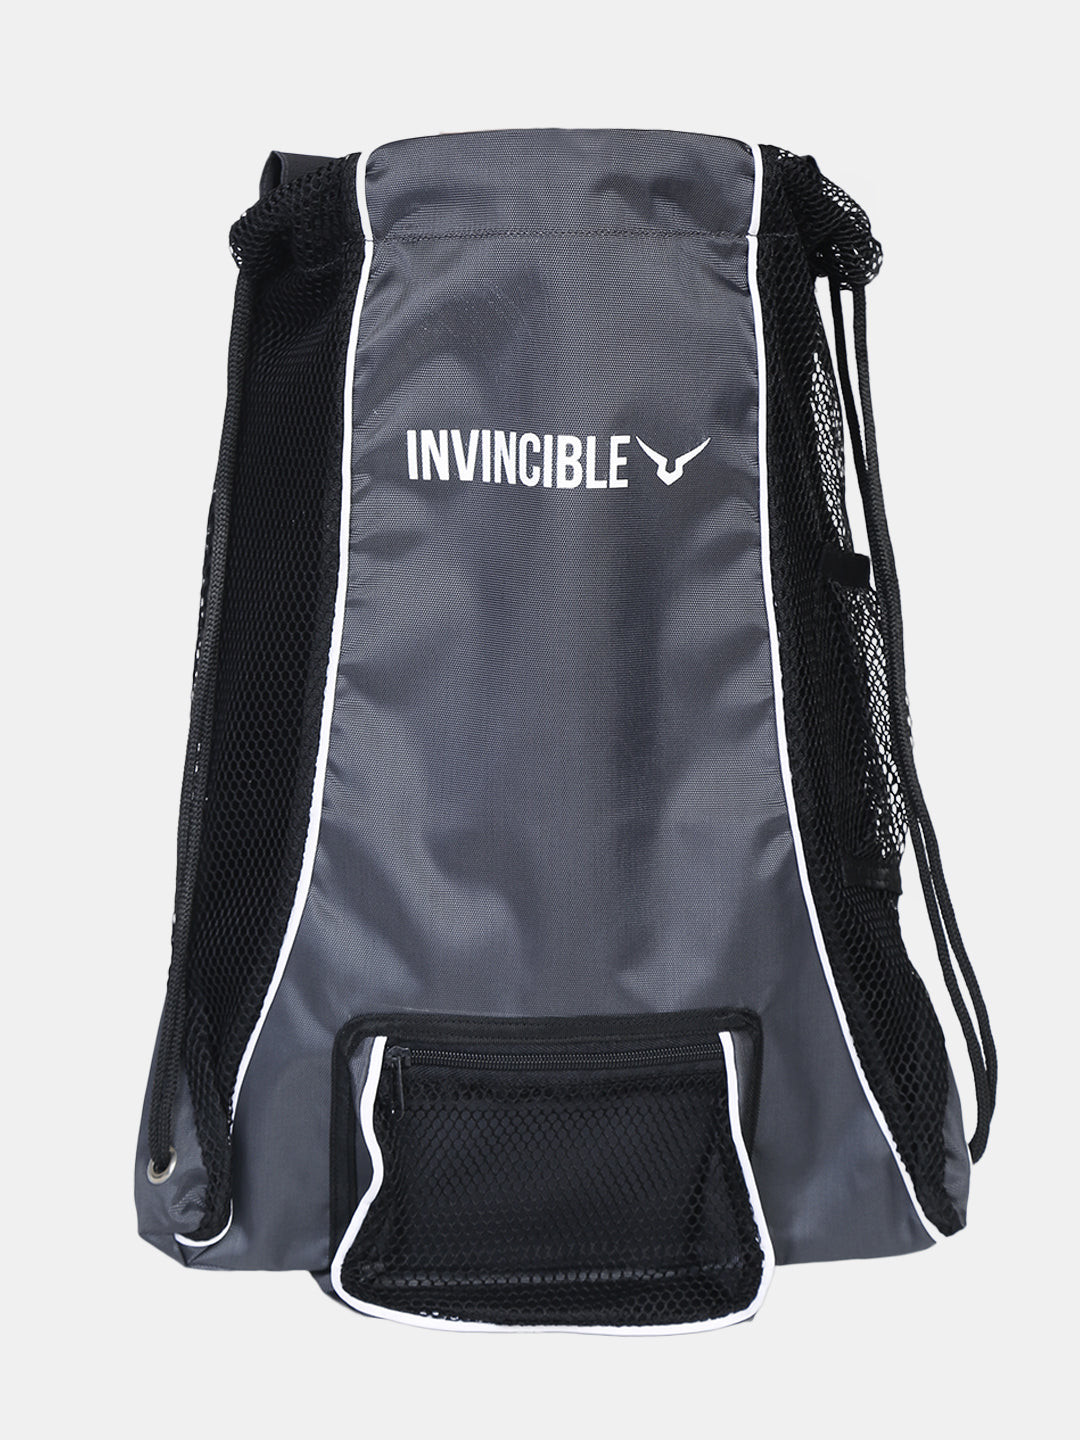 Invincible Boxing Gloves Drawstring Polyester Bag 15 Ltrs with Side Mesh for Air Ventilation